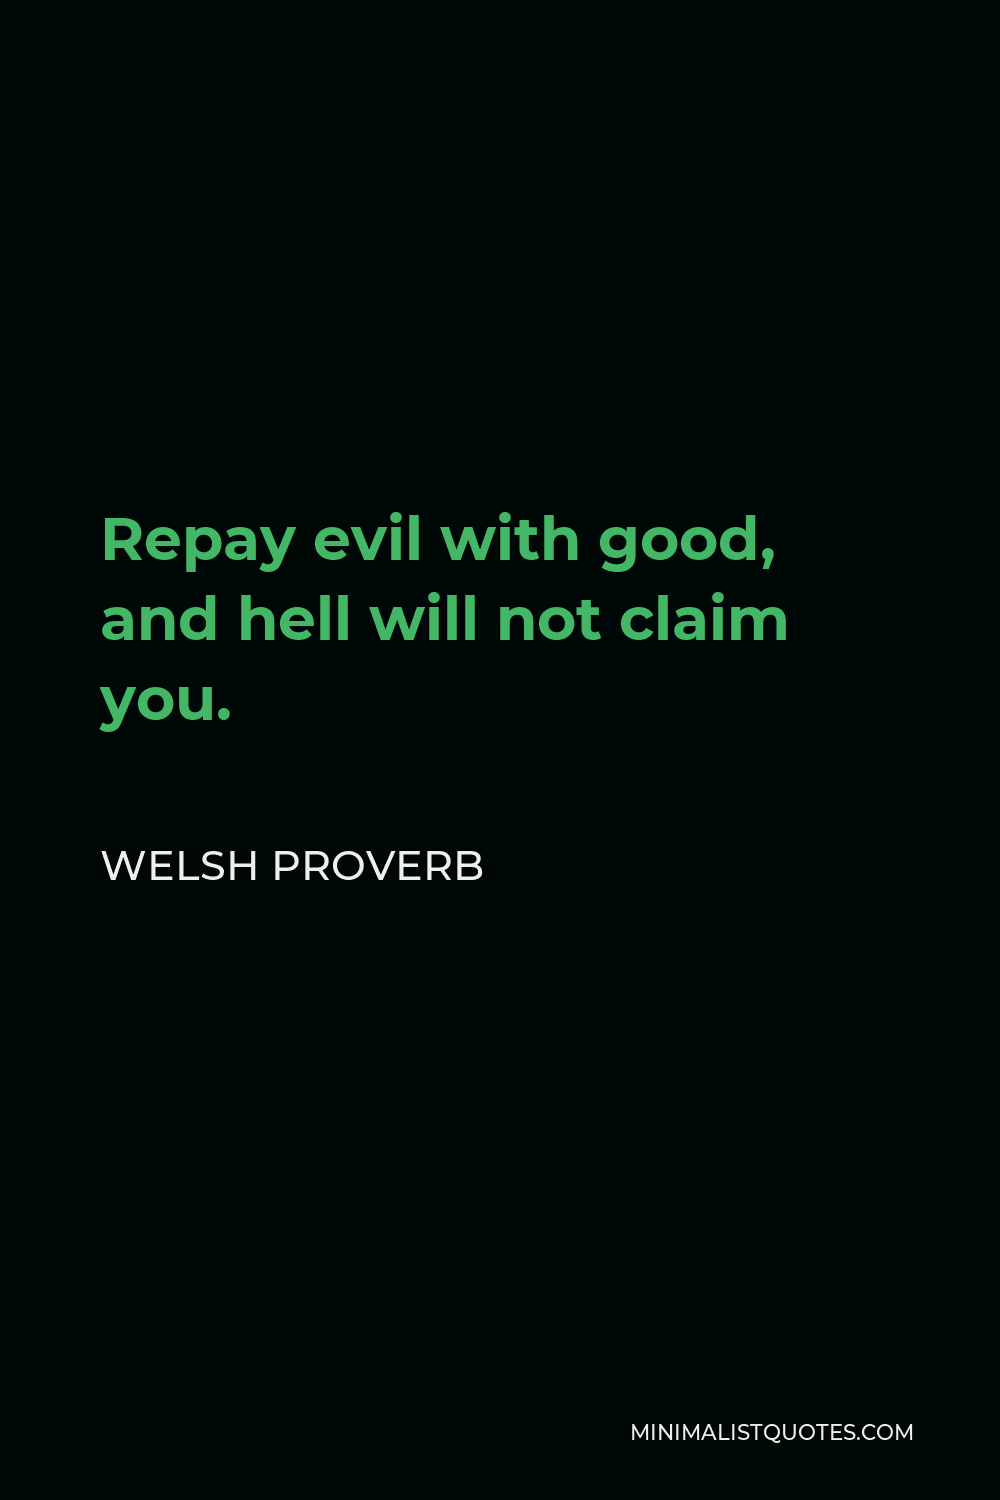 Welsh Proverb Quote - Repay evil with good, and hell will not claim you.